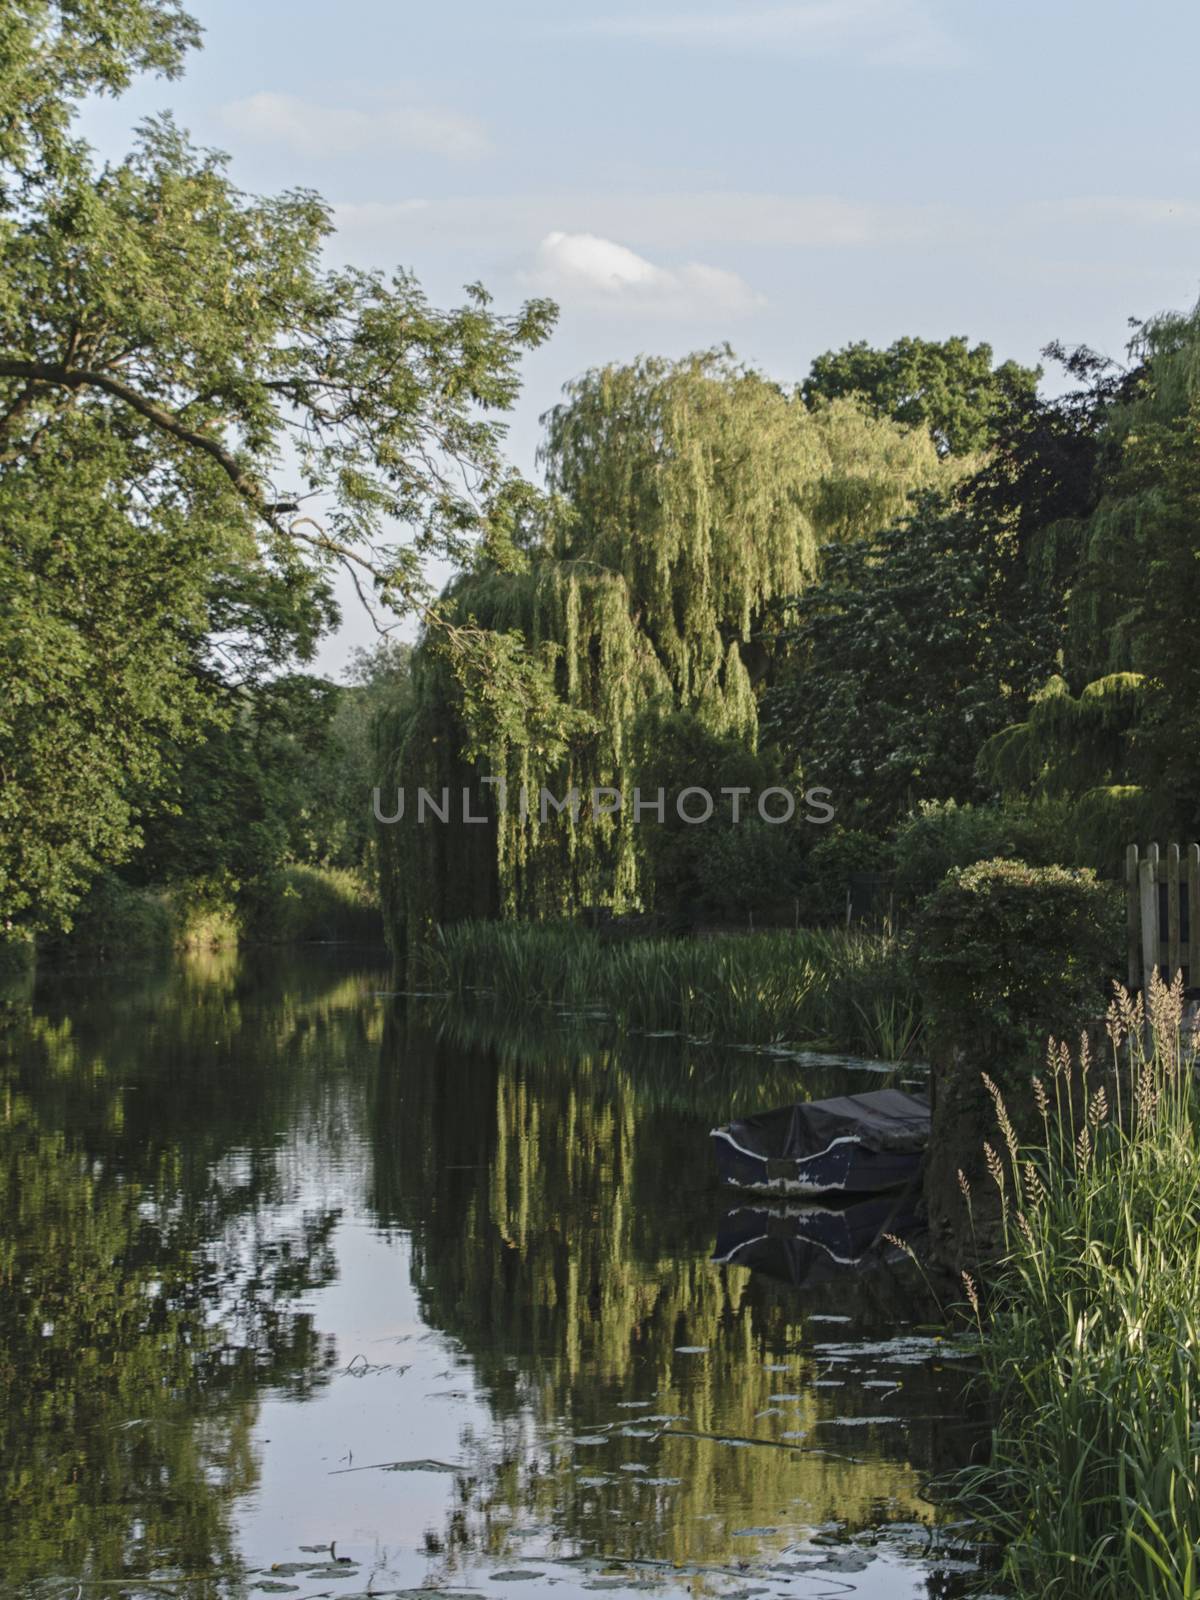 UK, Leicestershire - June 2015: Village back water - a weeping willow a rowing boat and reflections